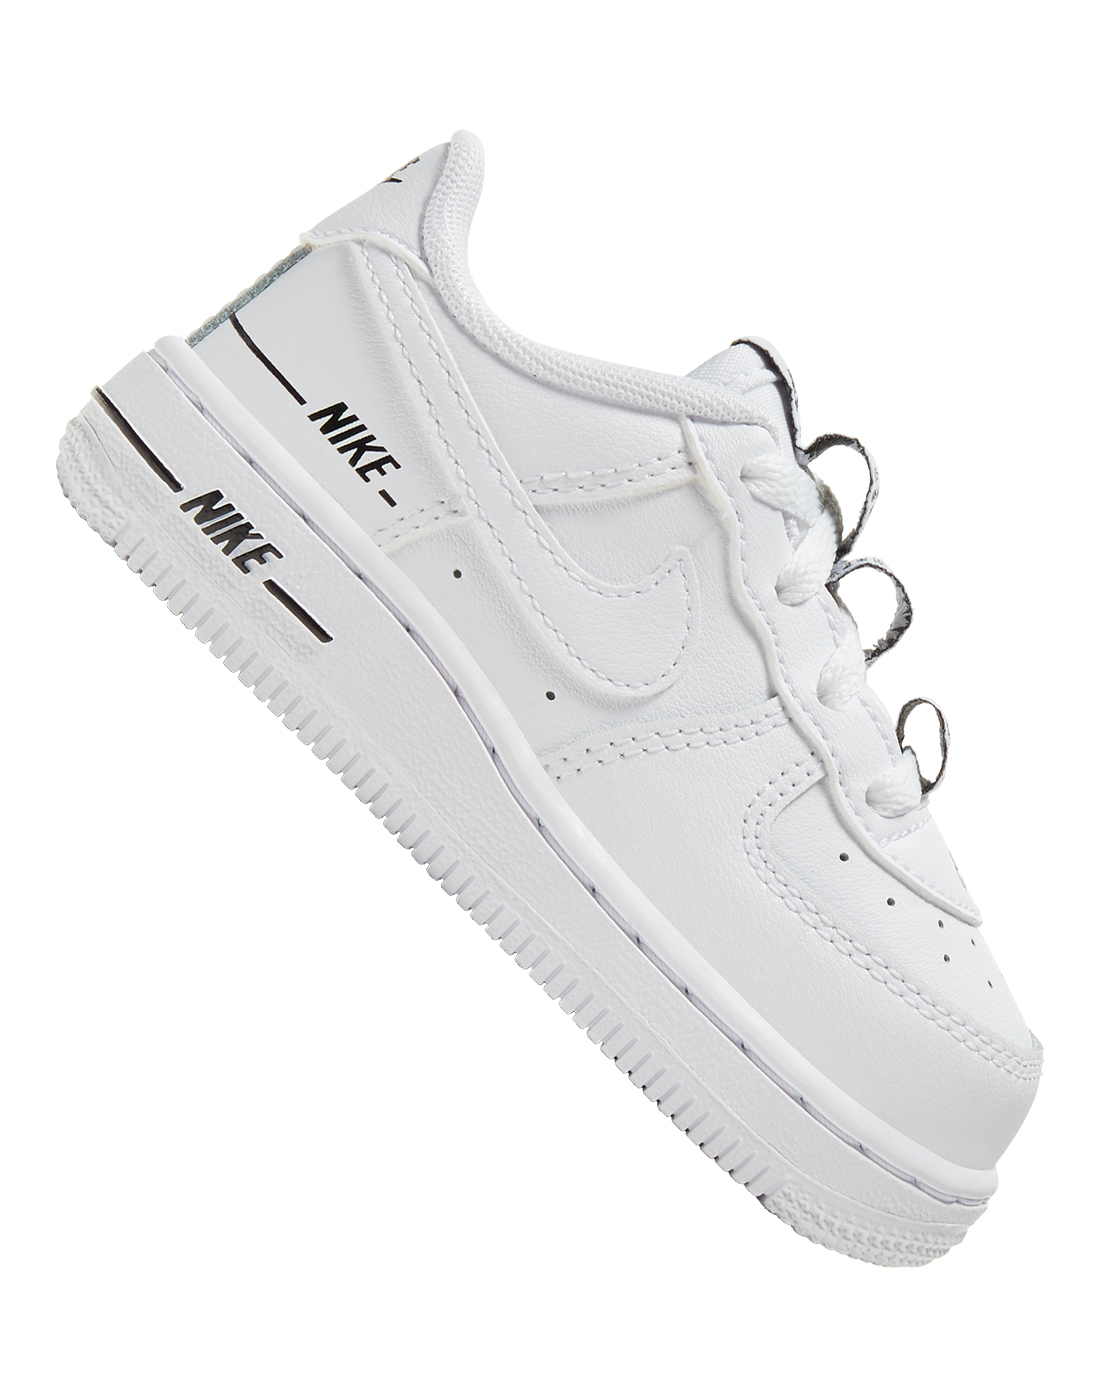 Nike Infants Air Force 1 LV8 3 - White | Life Style Sports UK